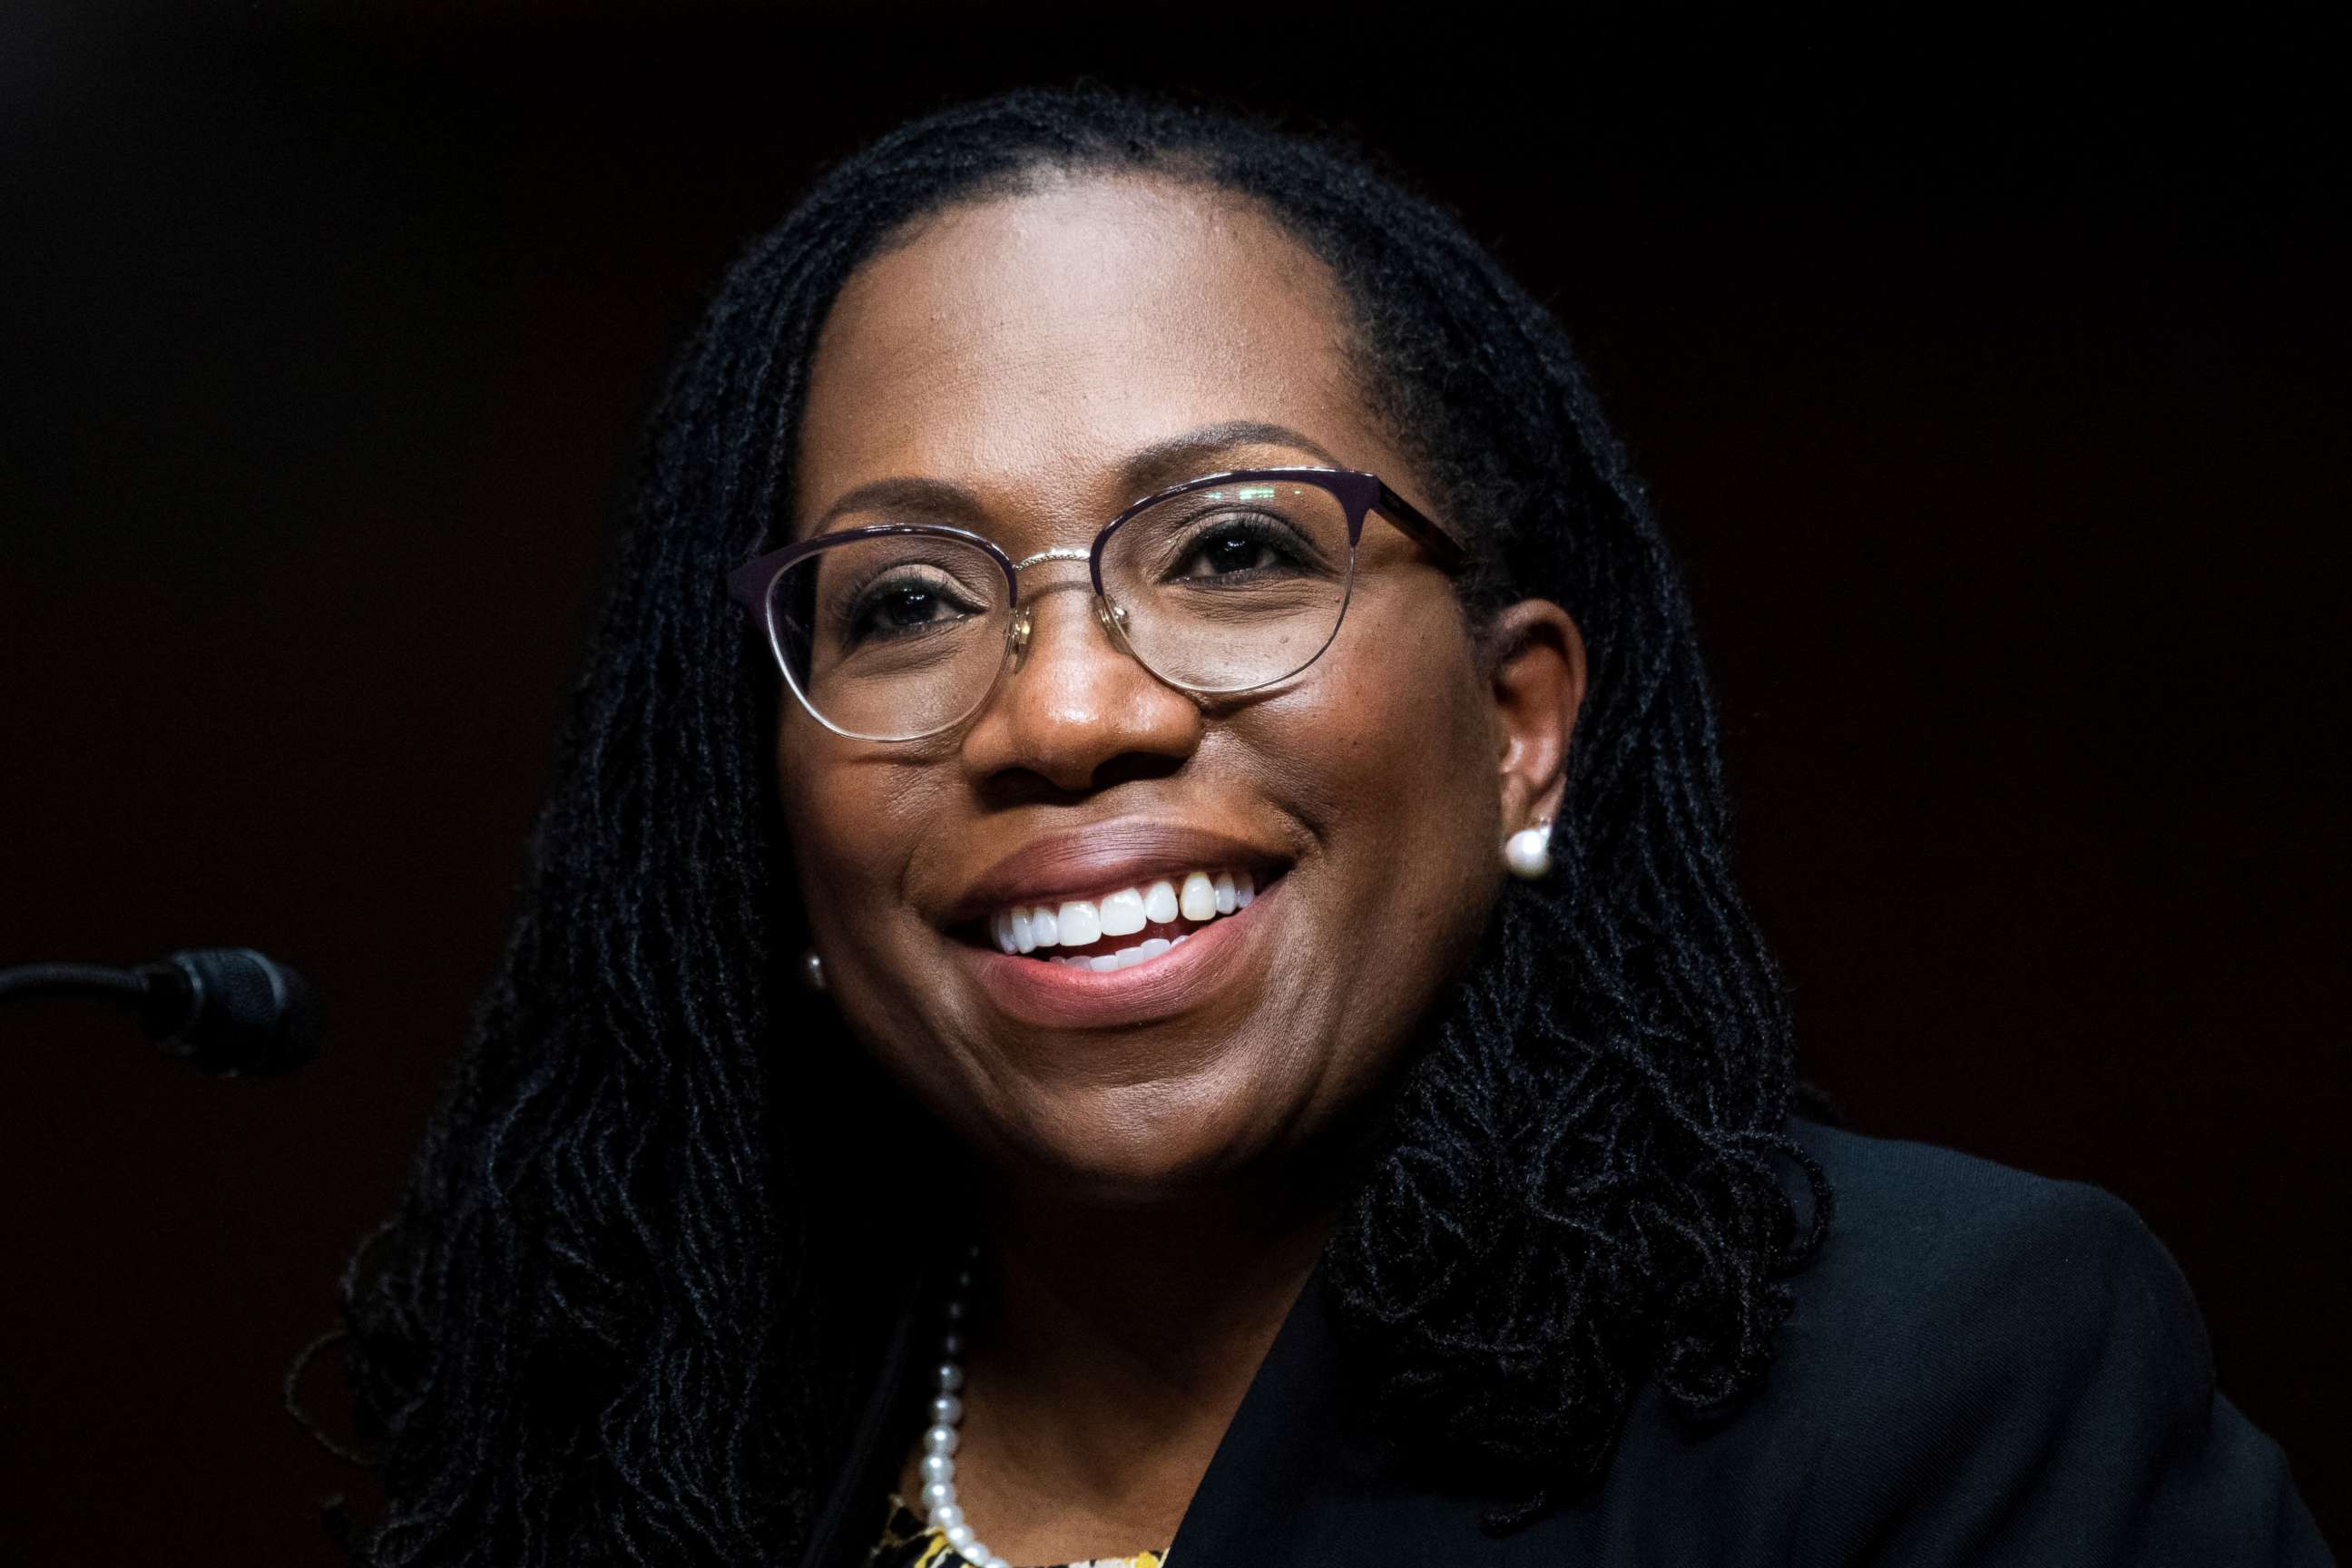 PHOTO: Ketanji Brown Jackson, nominated to be a US Circuit Judge for the District of Columbia Circuit, testifies before a Senate Judiciary Committee hearing on pending judicial nominations on Capitol Hill in Washington, April 28, 2021.